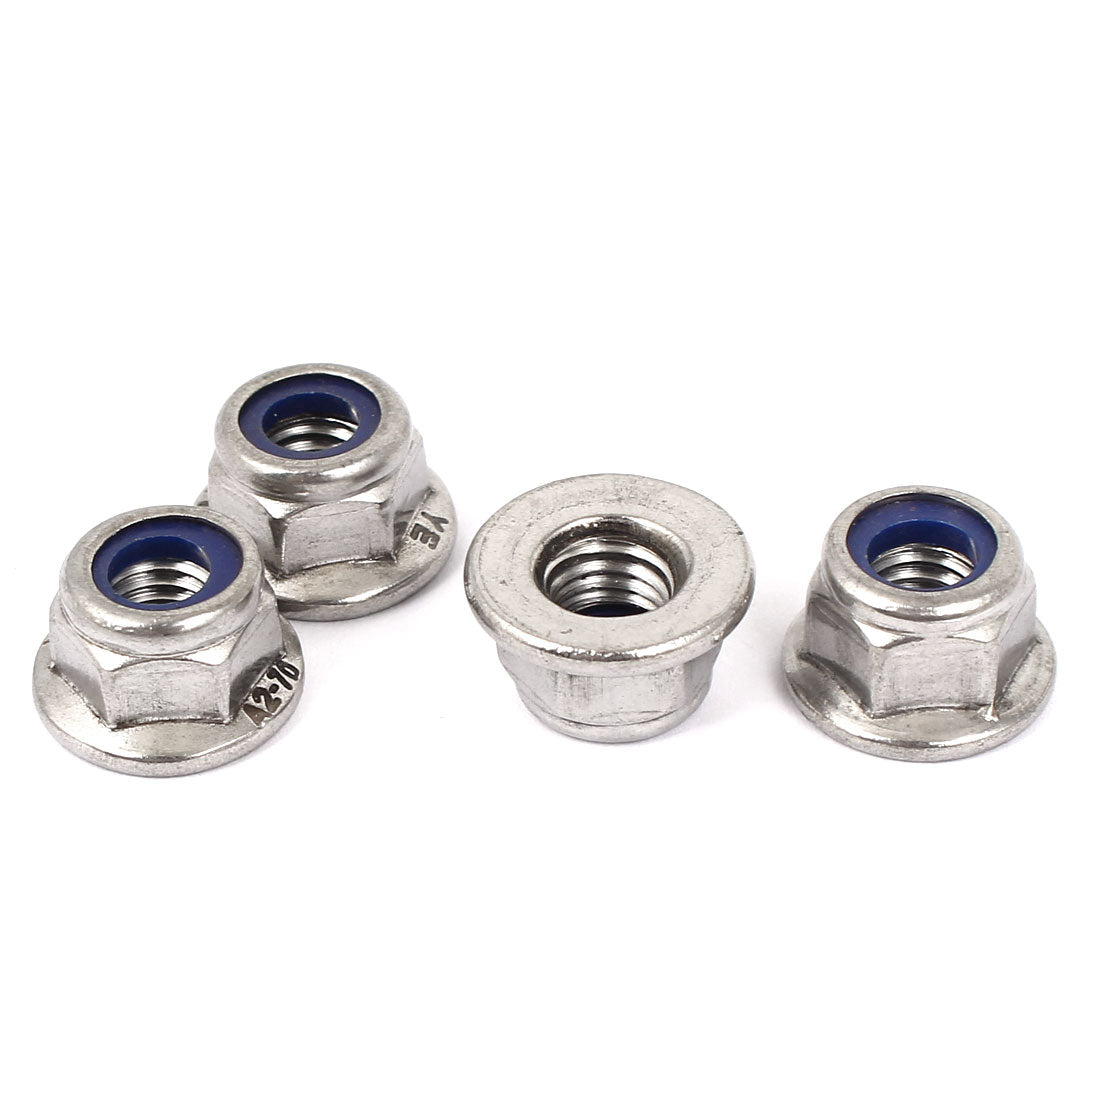 Uxcell Uxcell M8 304 Stainless Steel Hex Flange Nylon Insert Locking Lock Nuts 4pcs